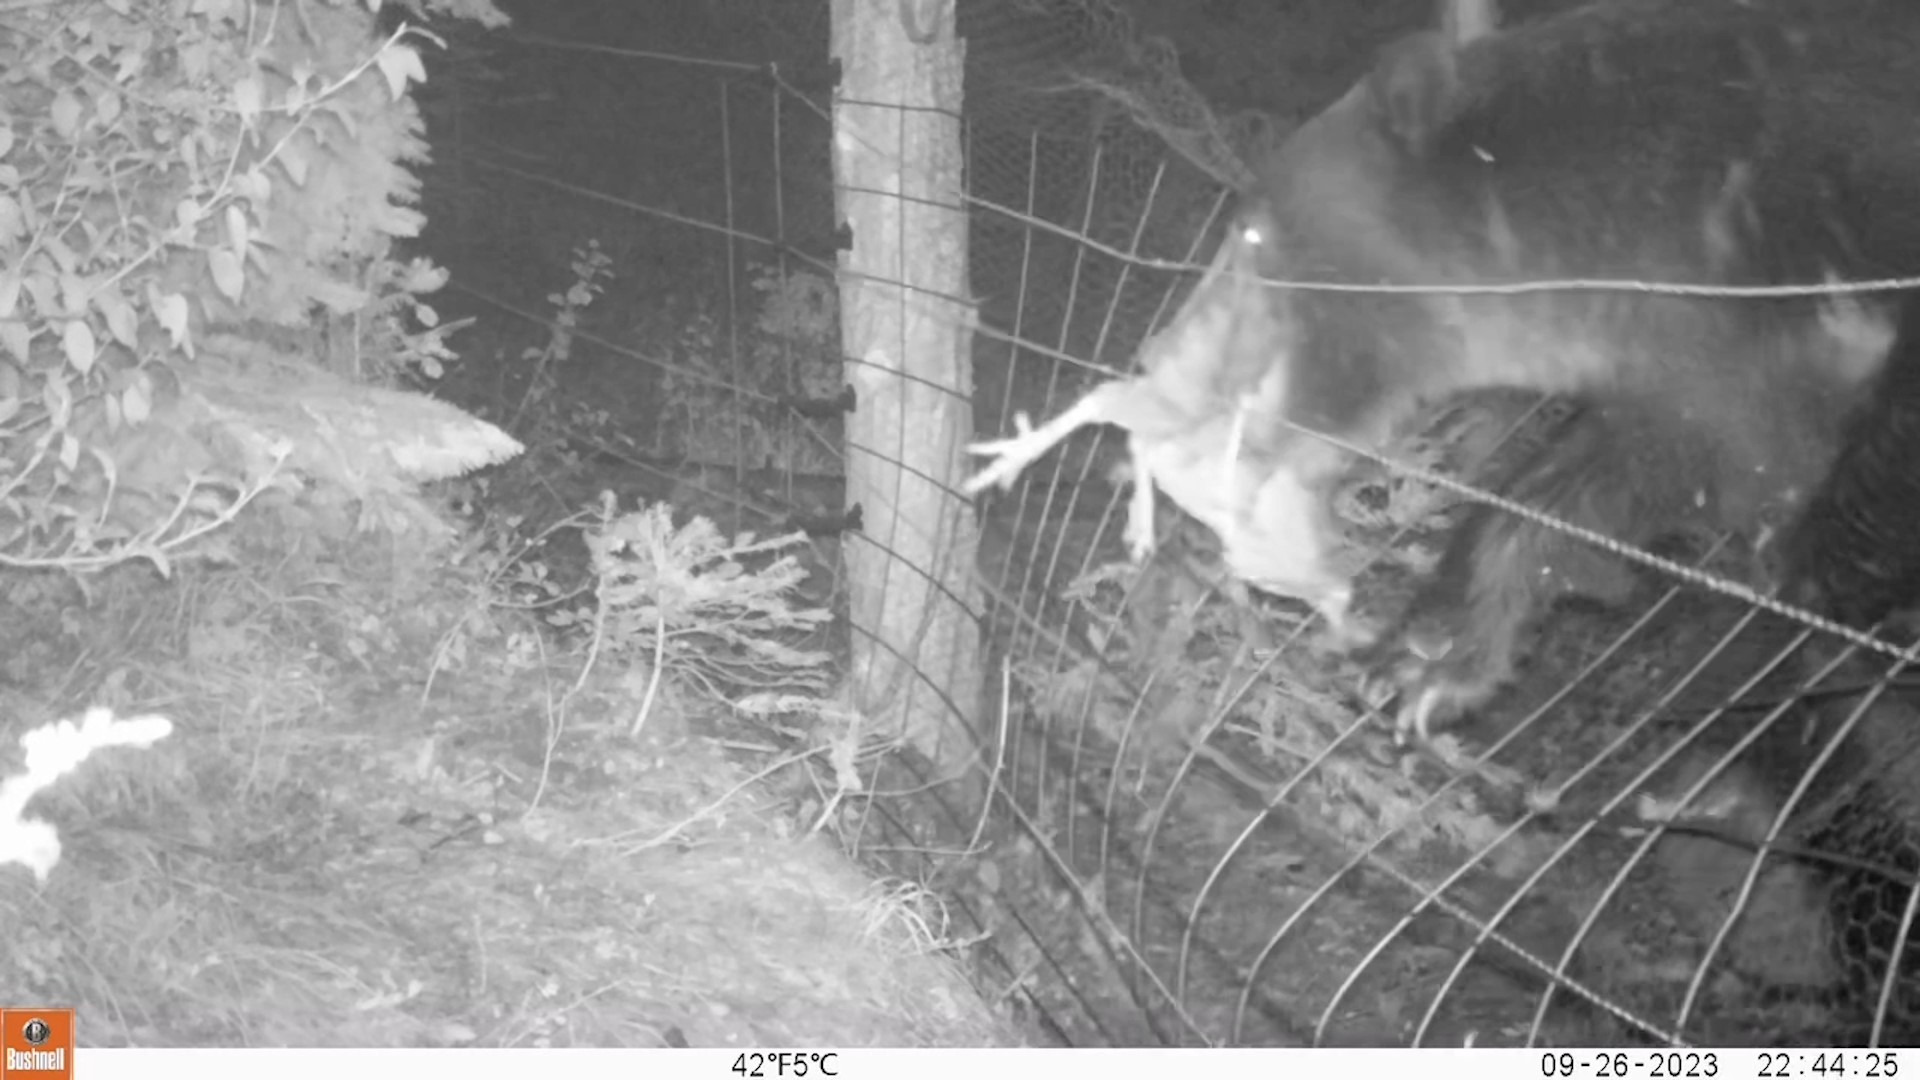 Grizzly bear captured on camera stealing a chicken in Stevens County.